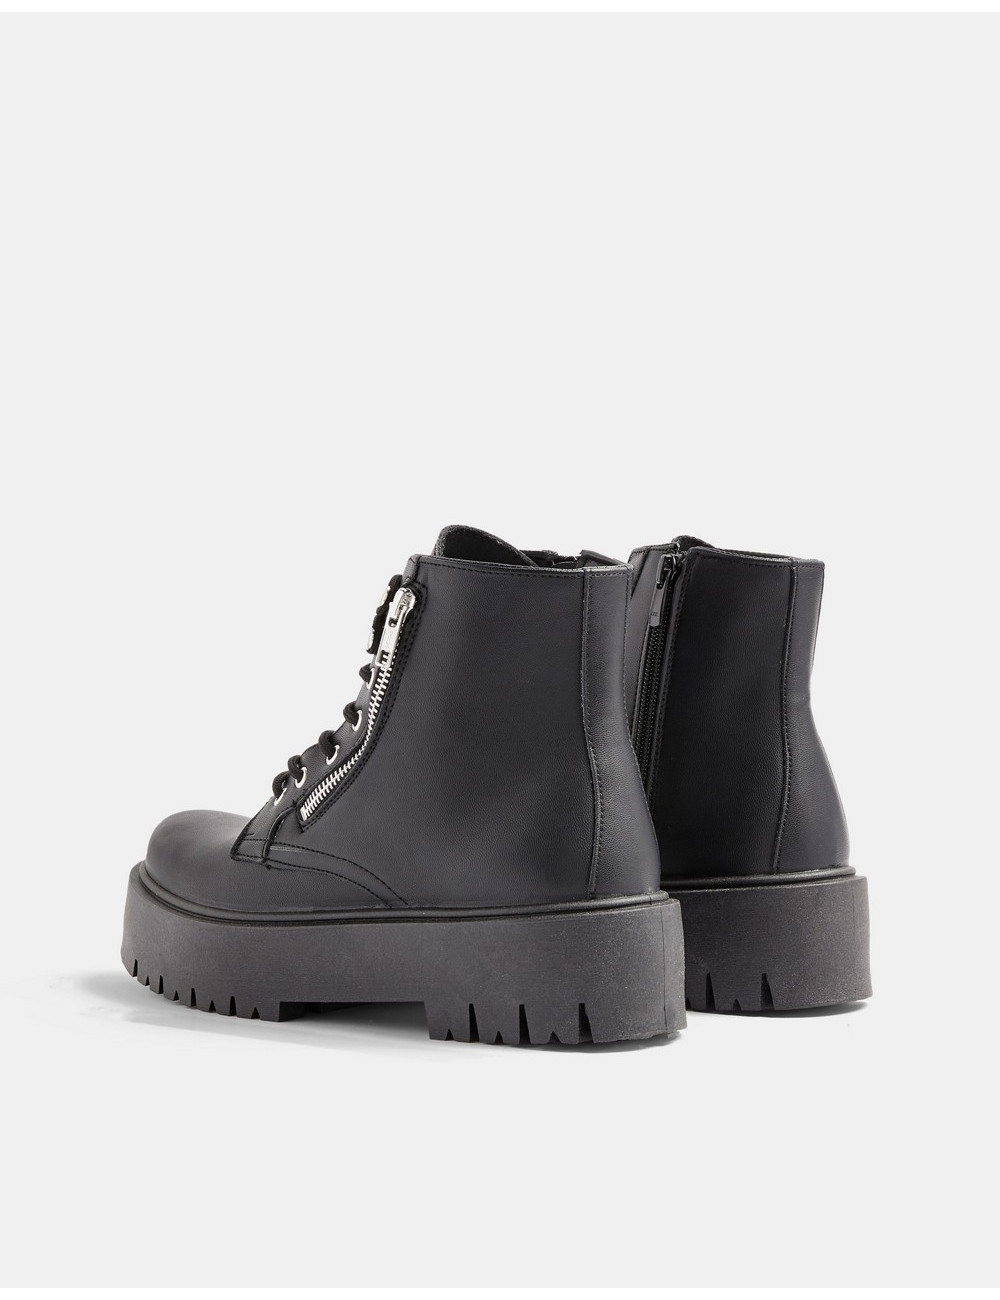 Topshop zip chunky boots in...